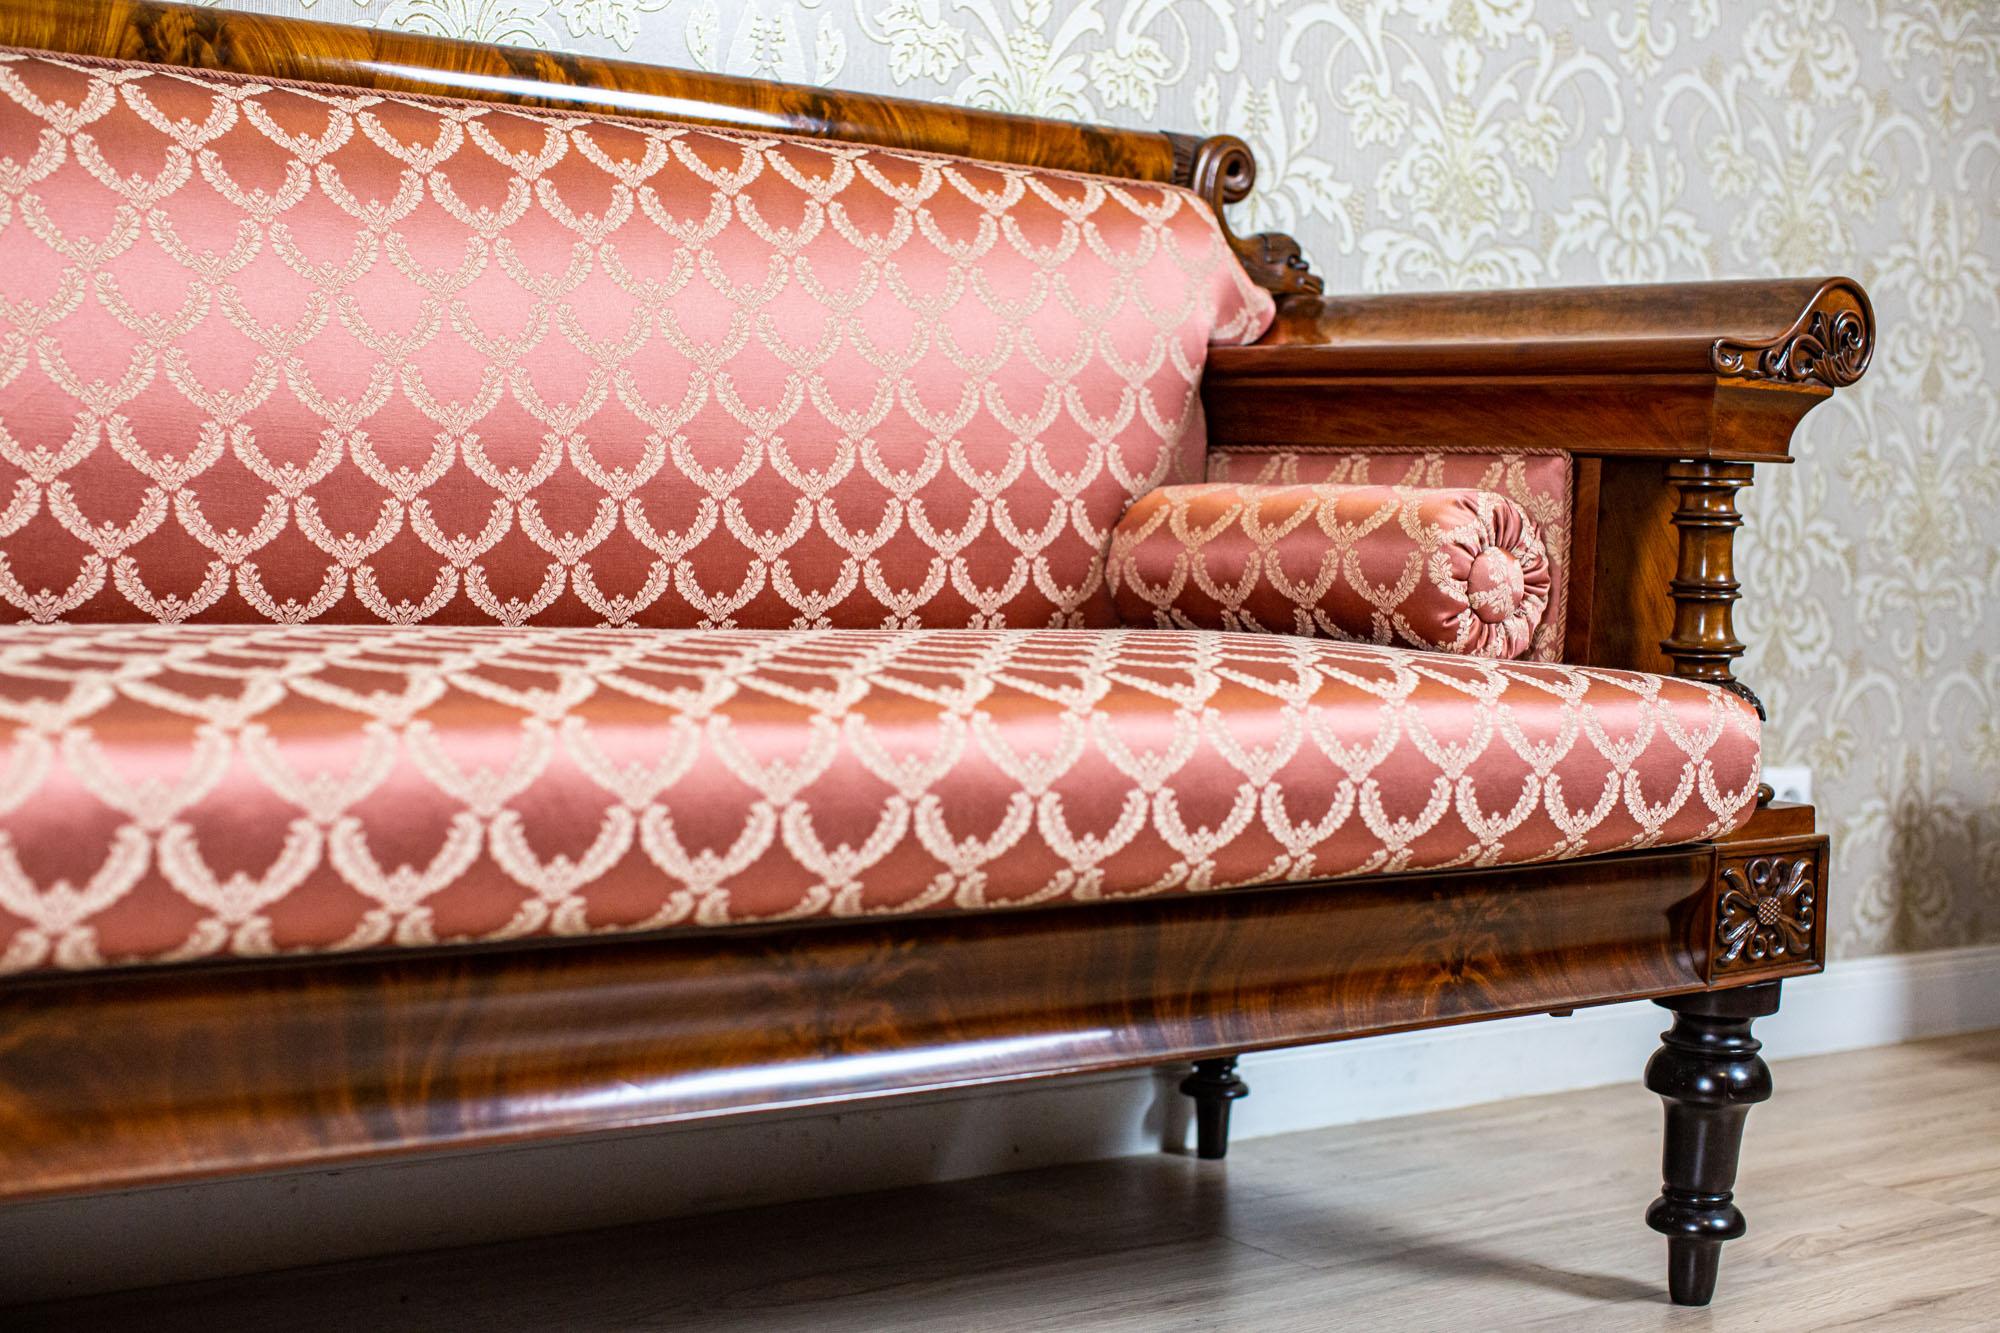 European 19th Century Empire Sofa in New Pink Upholstery